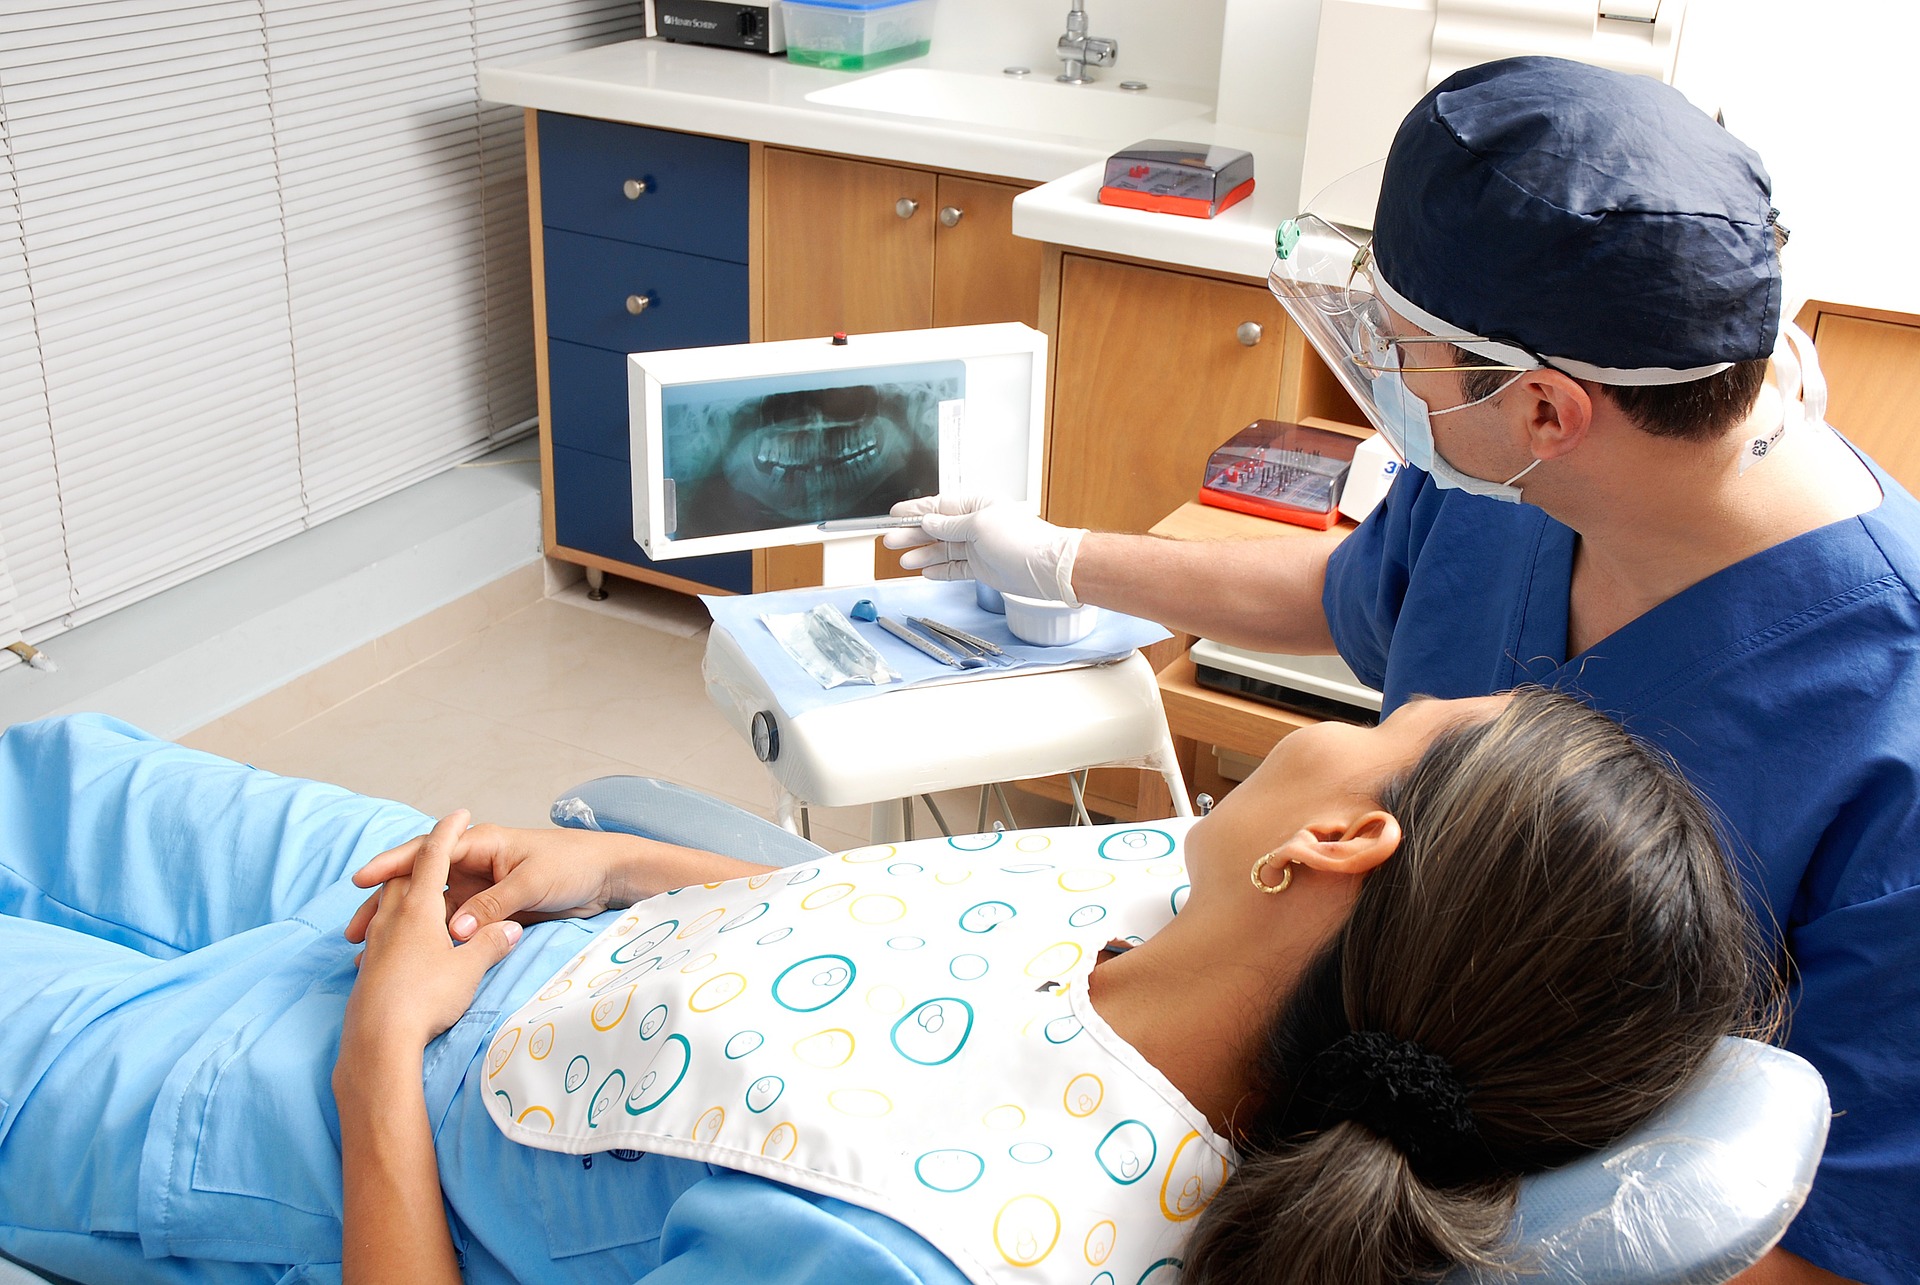 non-surgical gum treatment - dentist showing patient x-ray of teeth